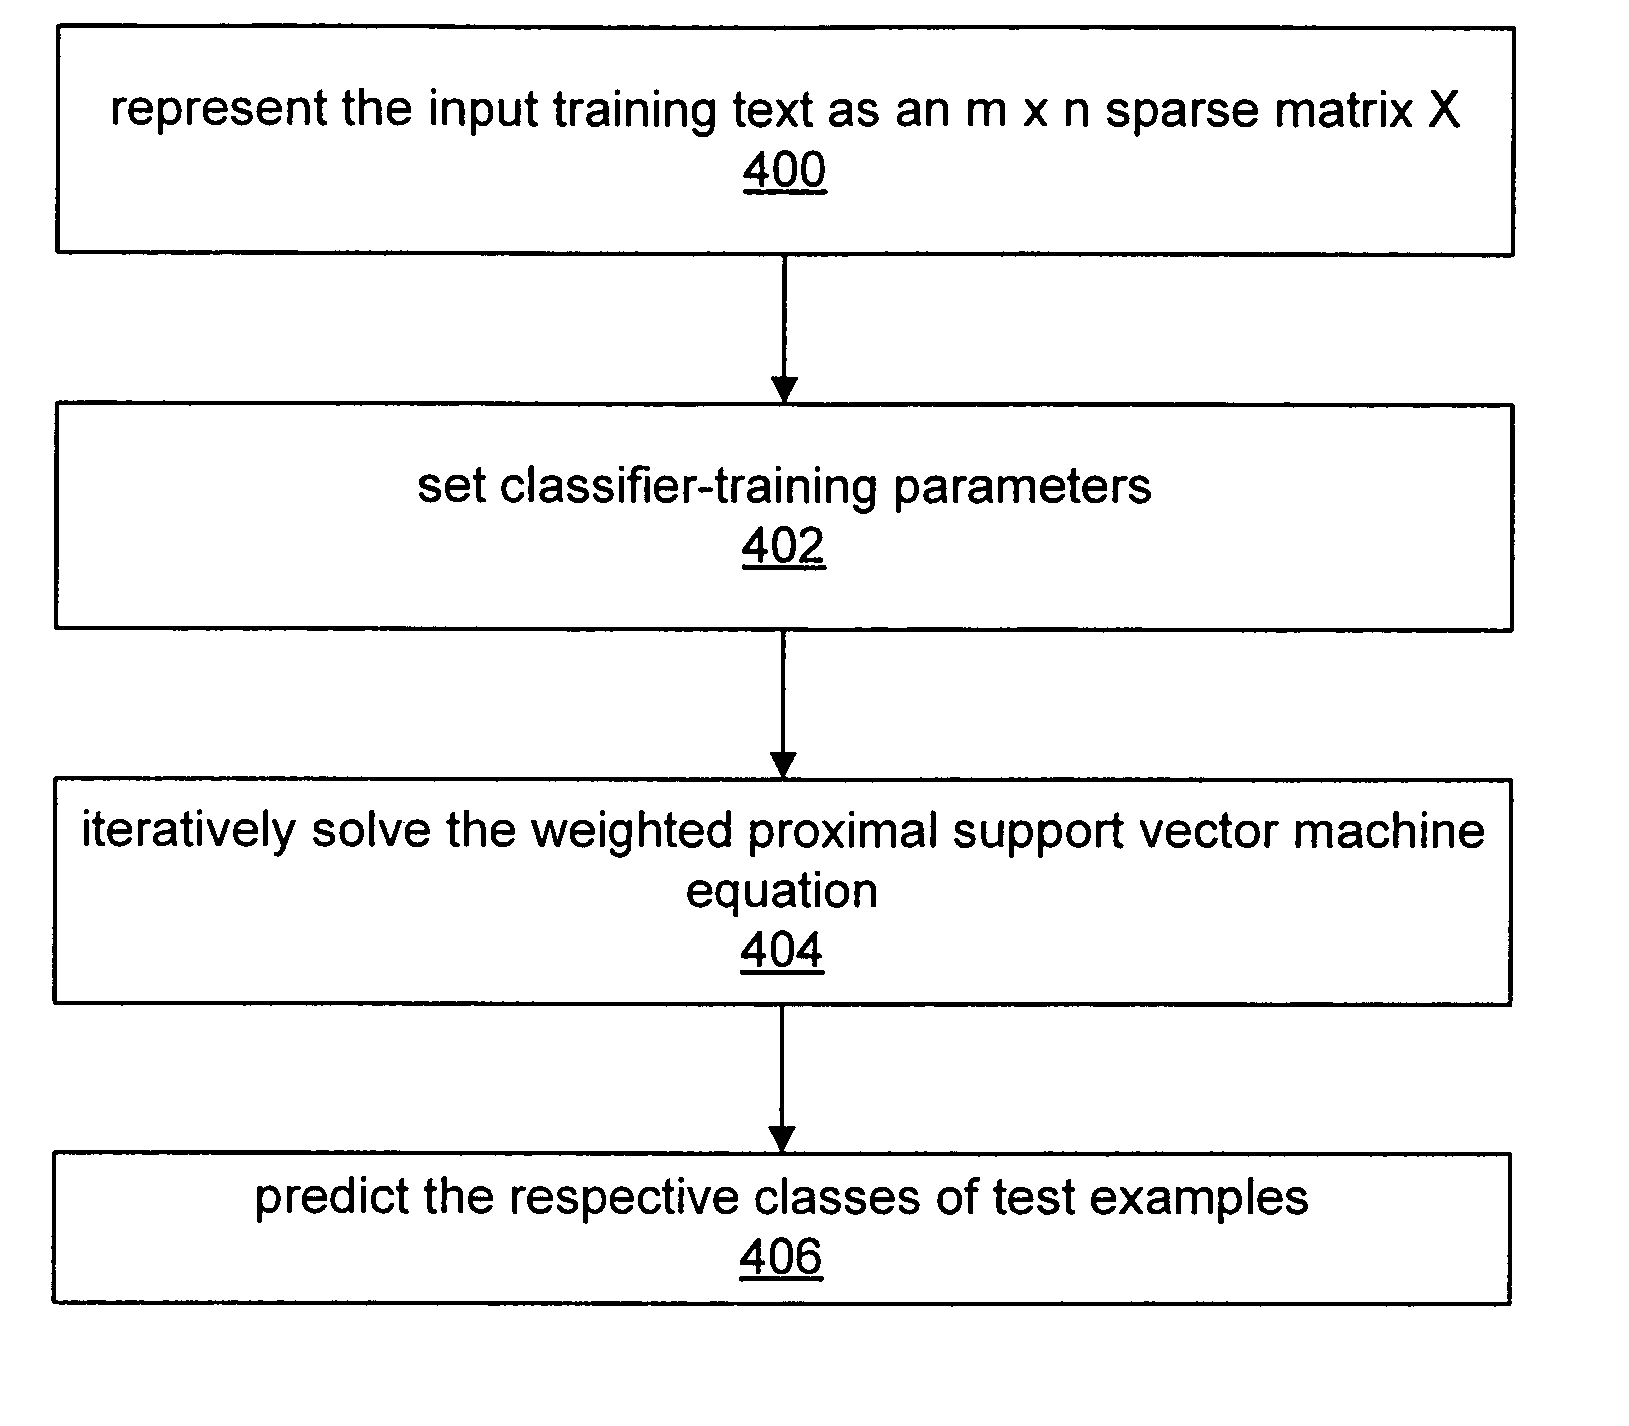 Text classification by weighted proximal support vector machine